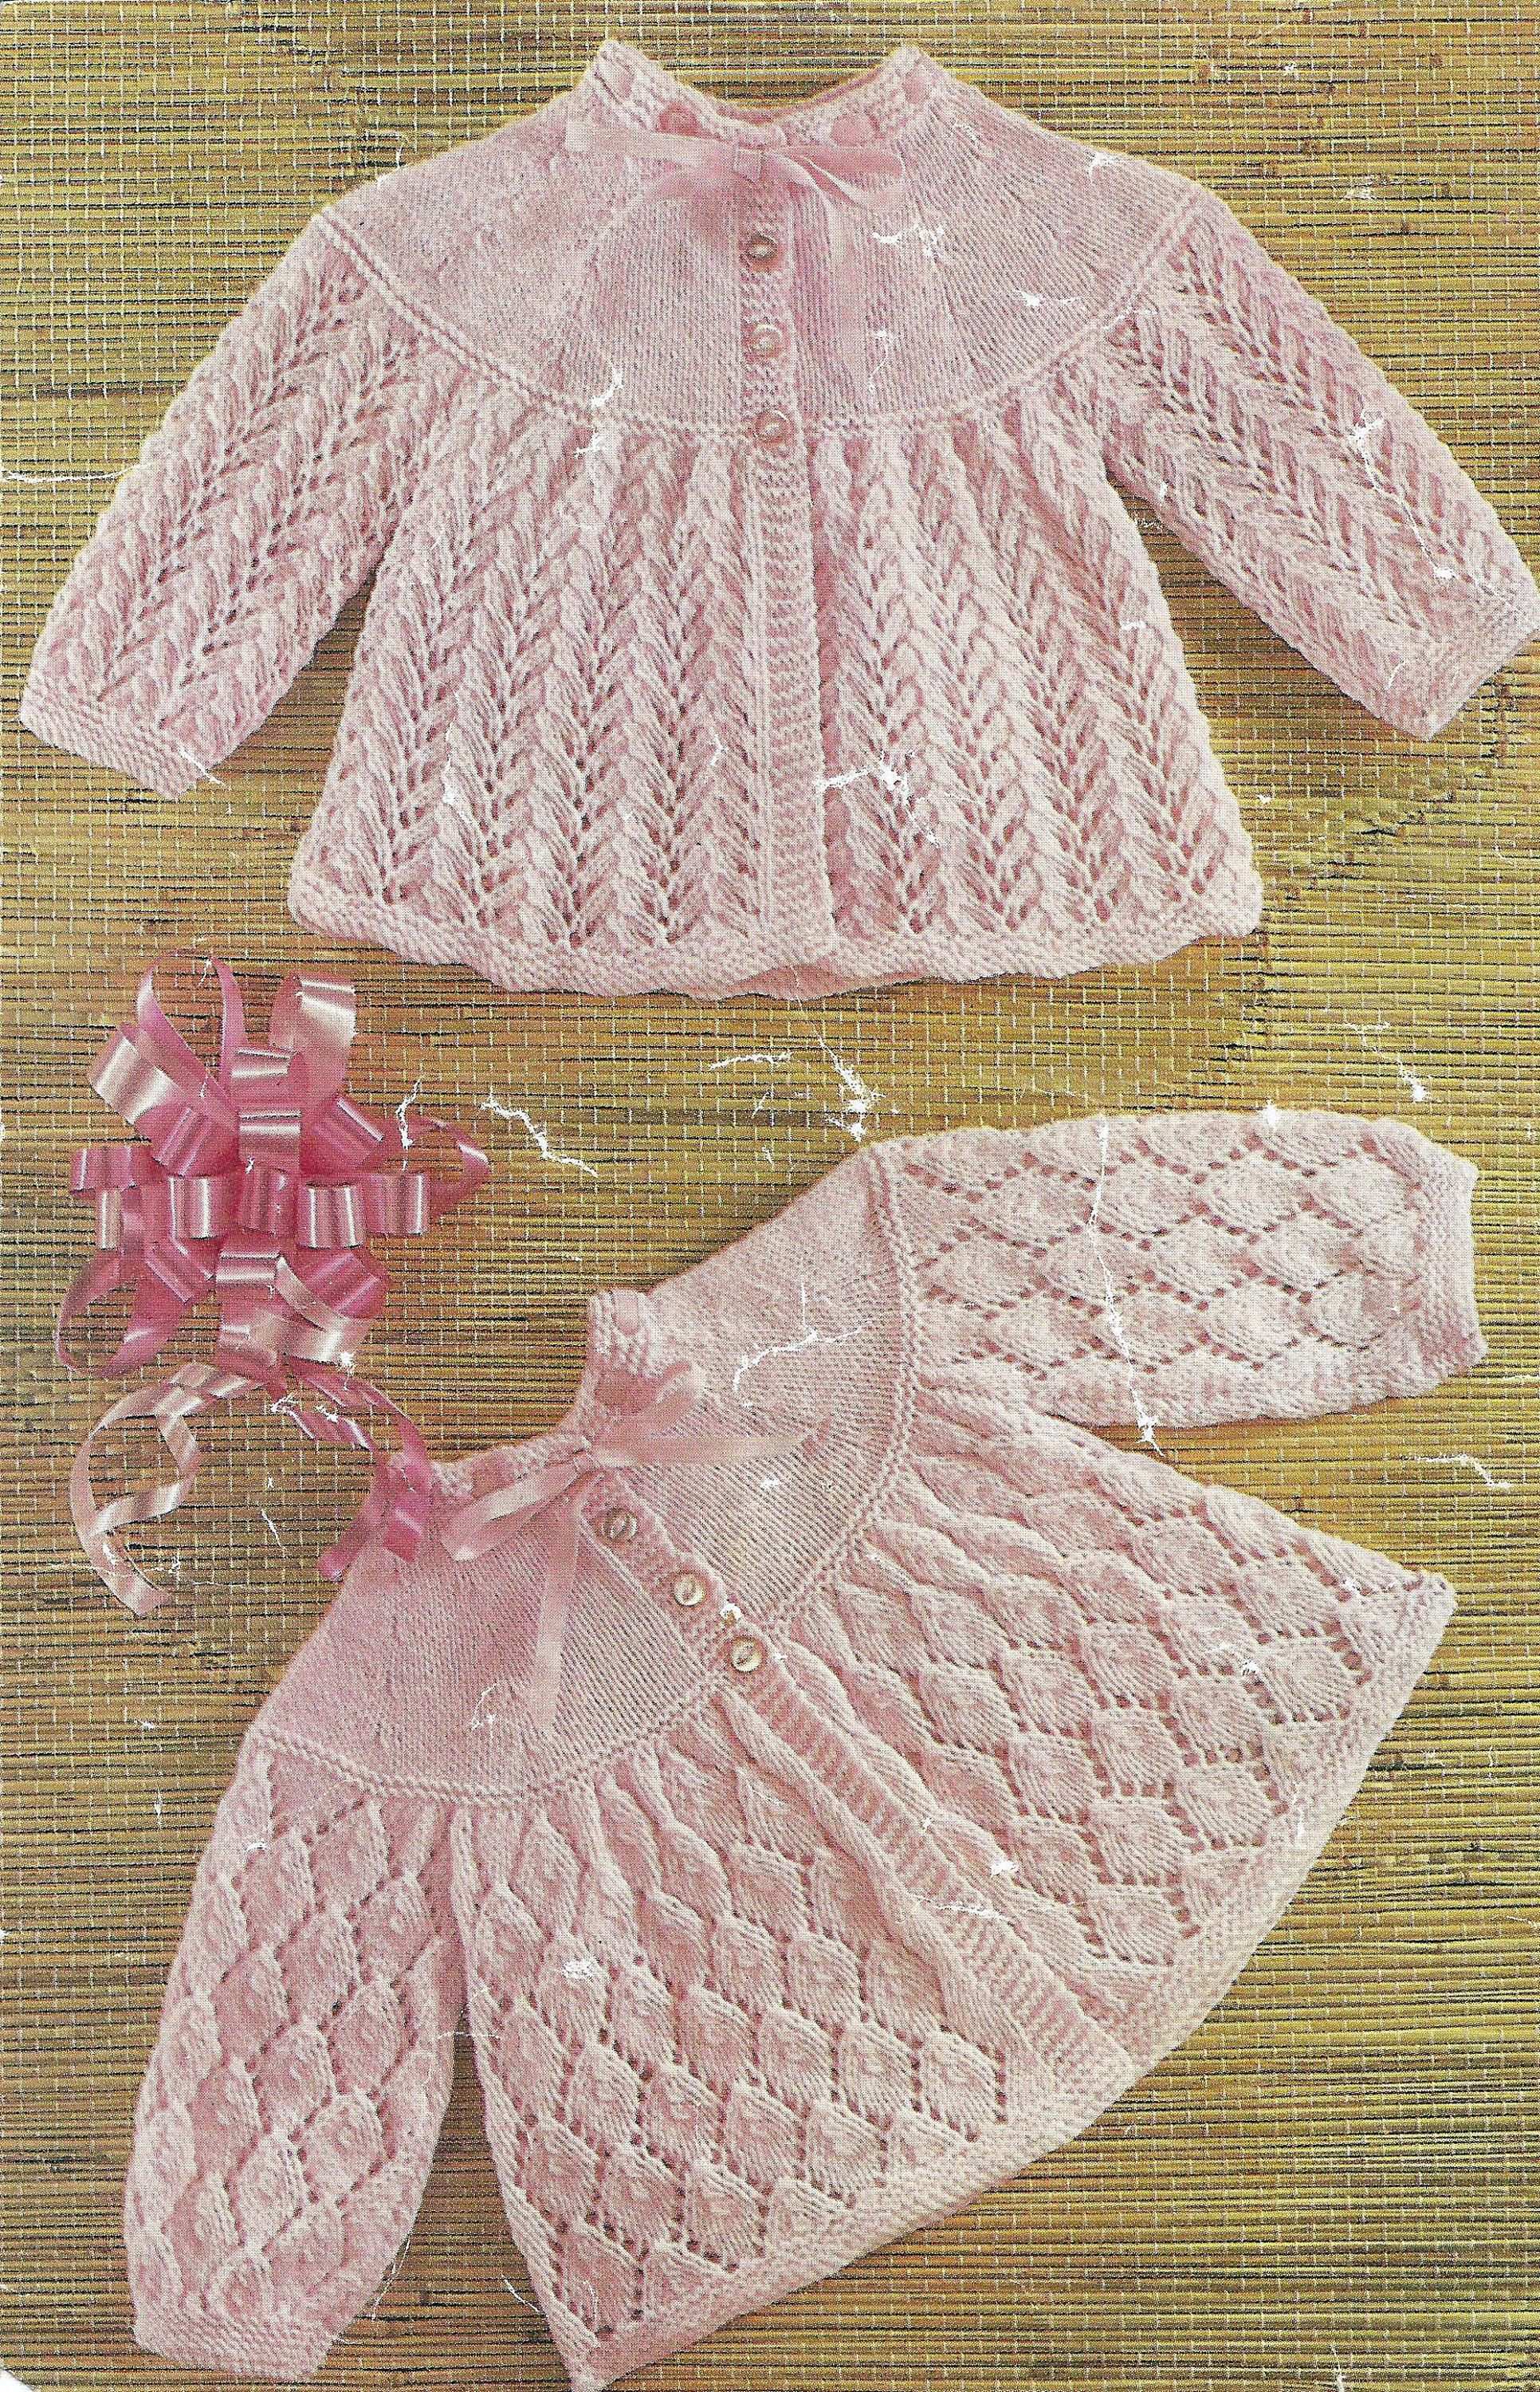 Best 12 Free Almost Pdf Instant Download Baby Matinee Coats Knitting Pattern 17 To 19 Inch 646 B Hakeln Baby Strickjacke Baby Stricken Baby Pullover Stricken